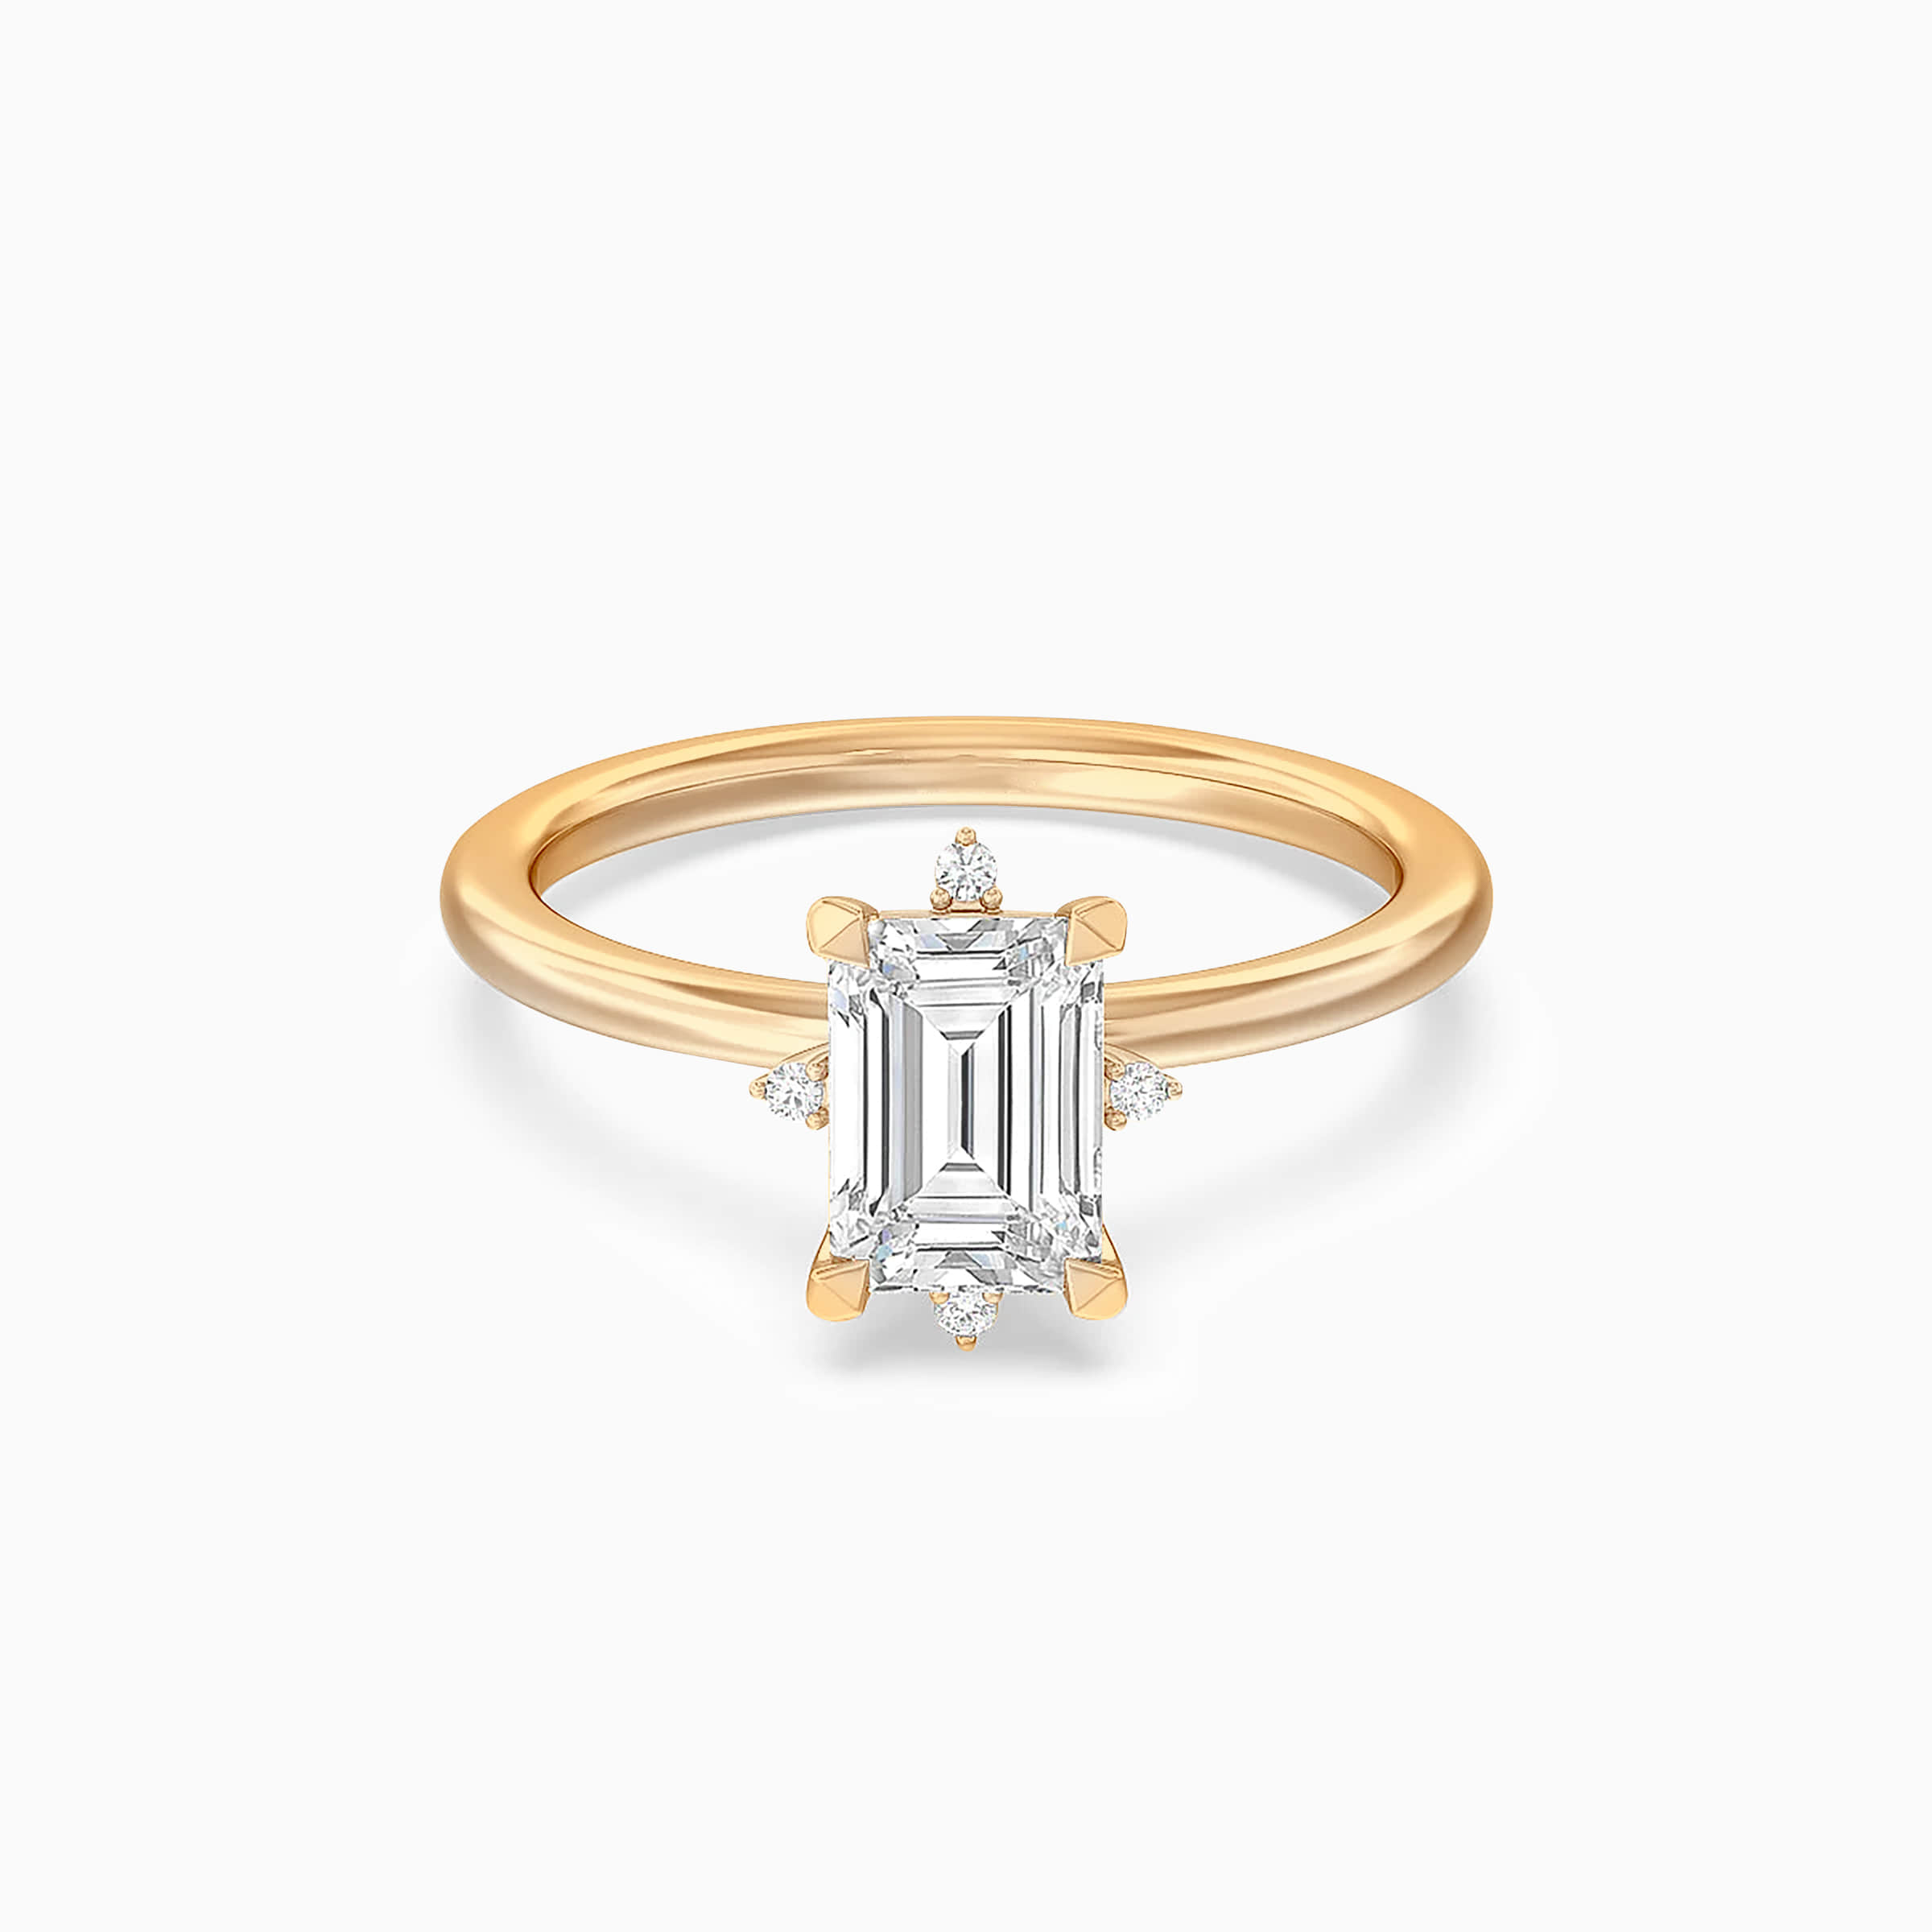 Darry Ring classic emerald cut engagement ring in yellow gold